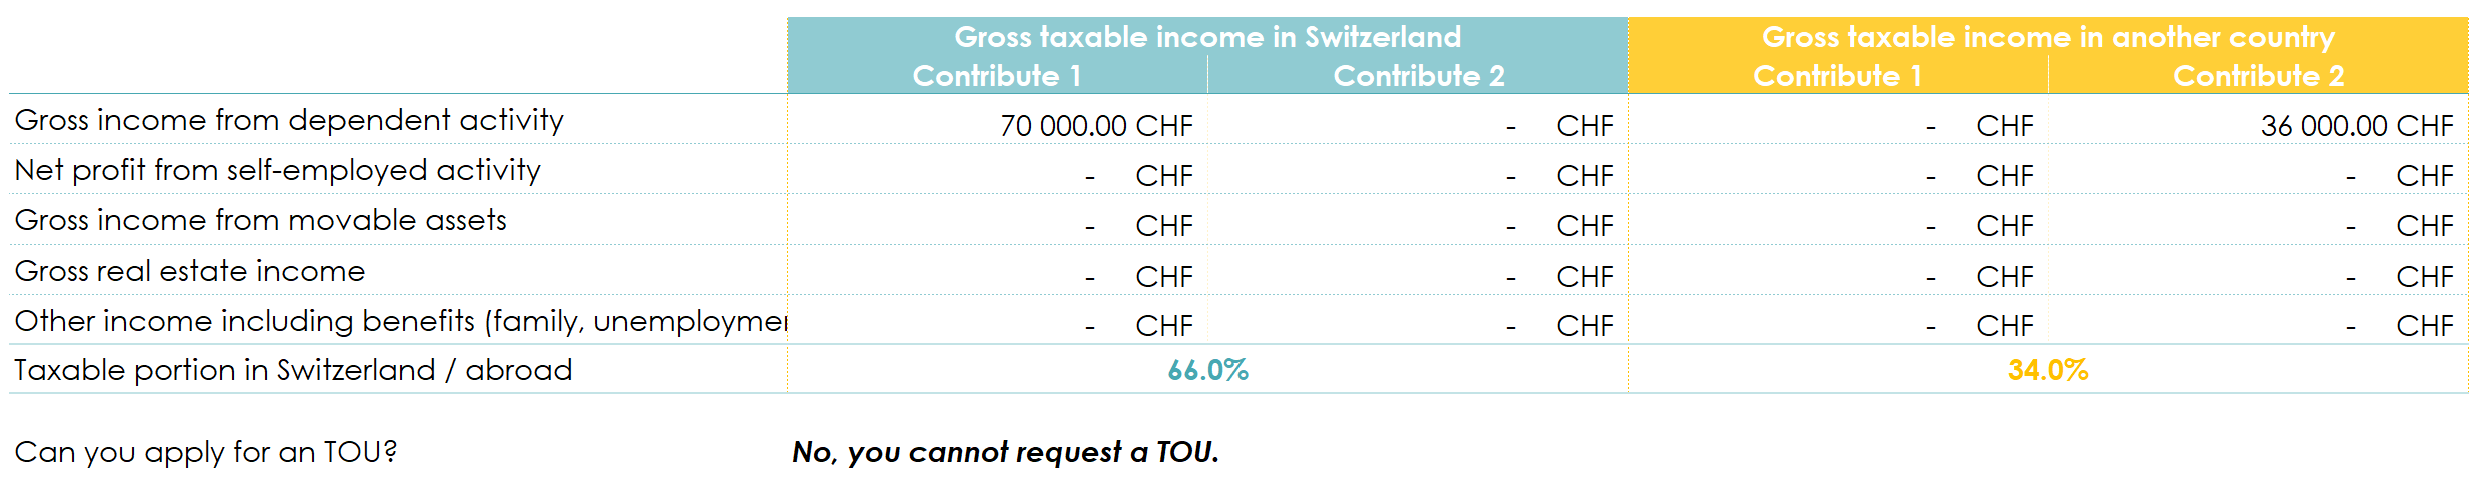 Table showing the distribution of the taxable portion of gross income between Switzerland and abroad for a married couple, one of whom does not work in Switzerland